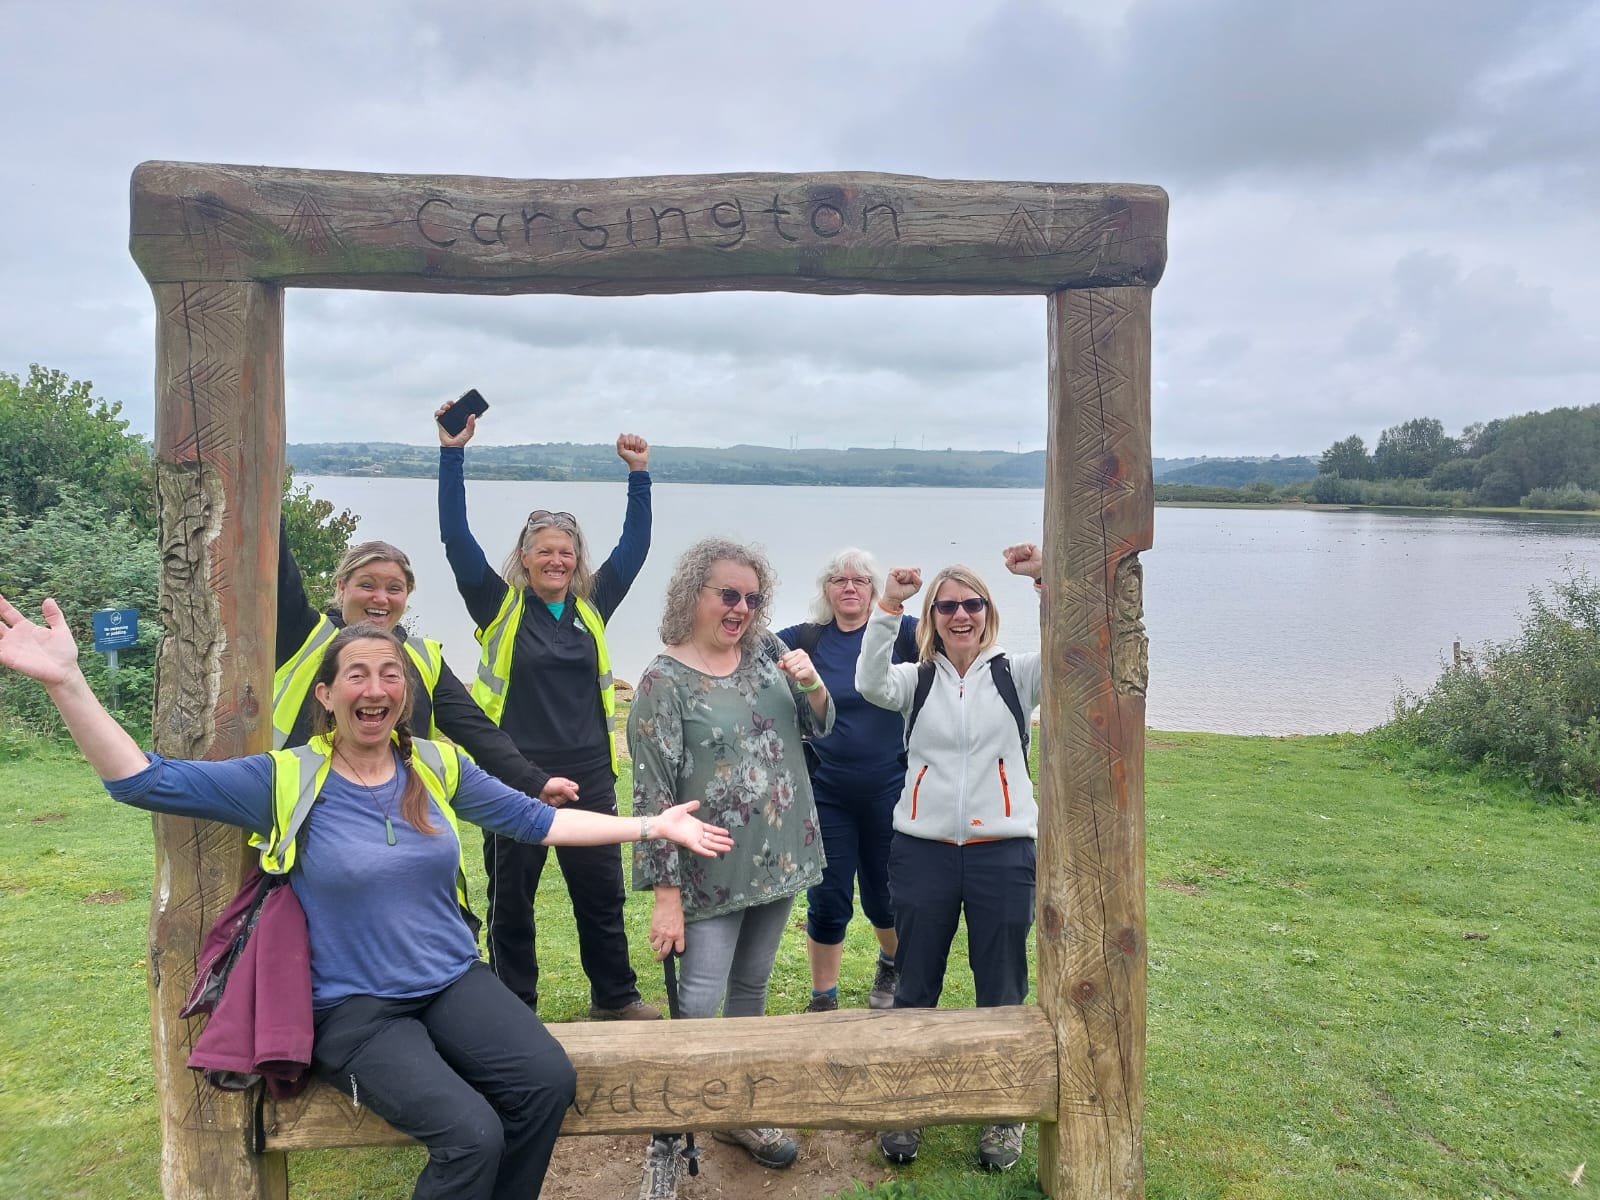 Group photo with wooden frame with Carsington Water background.